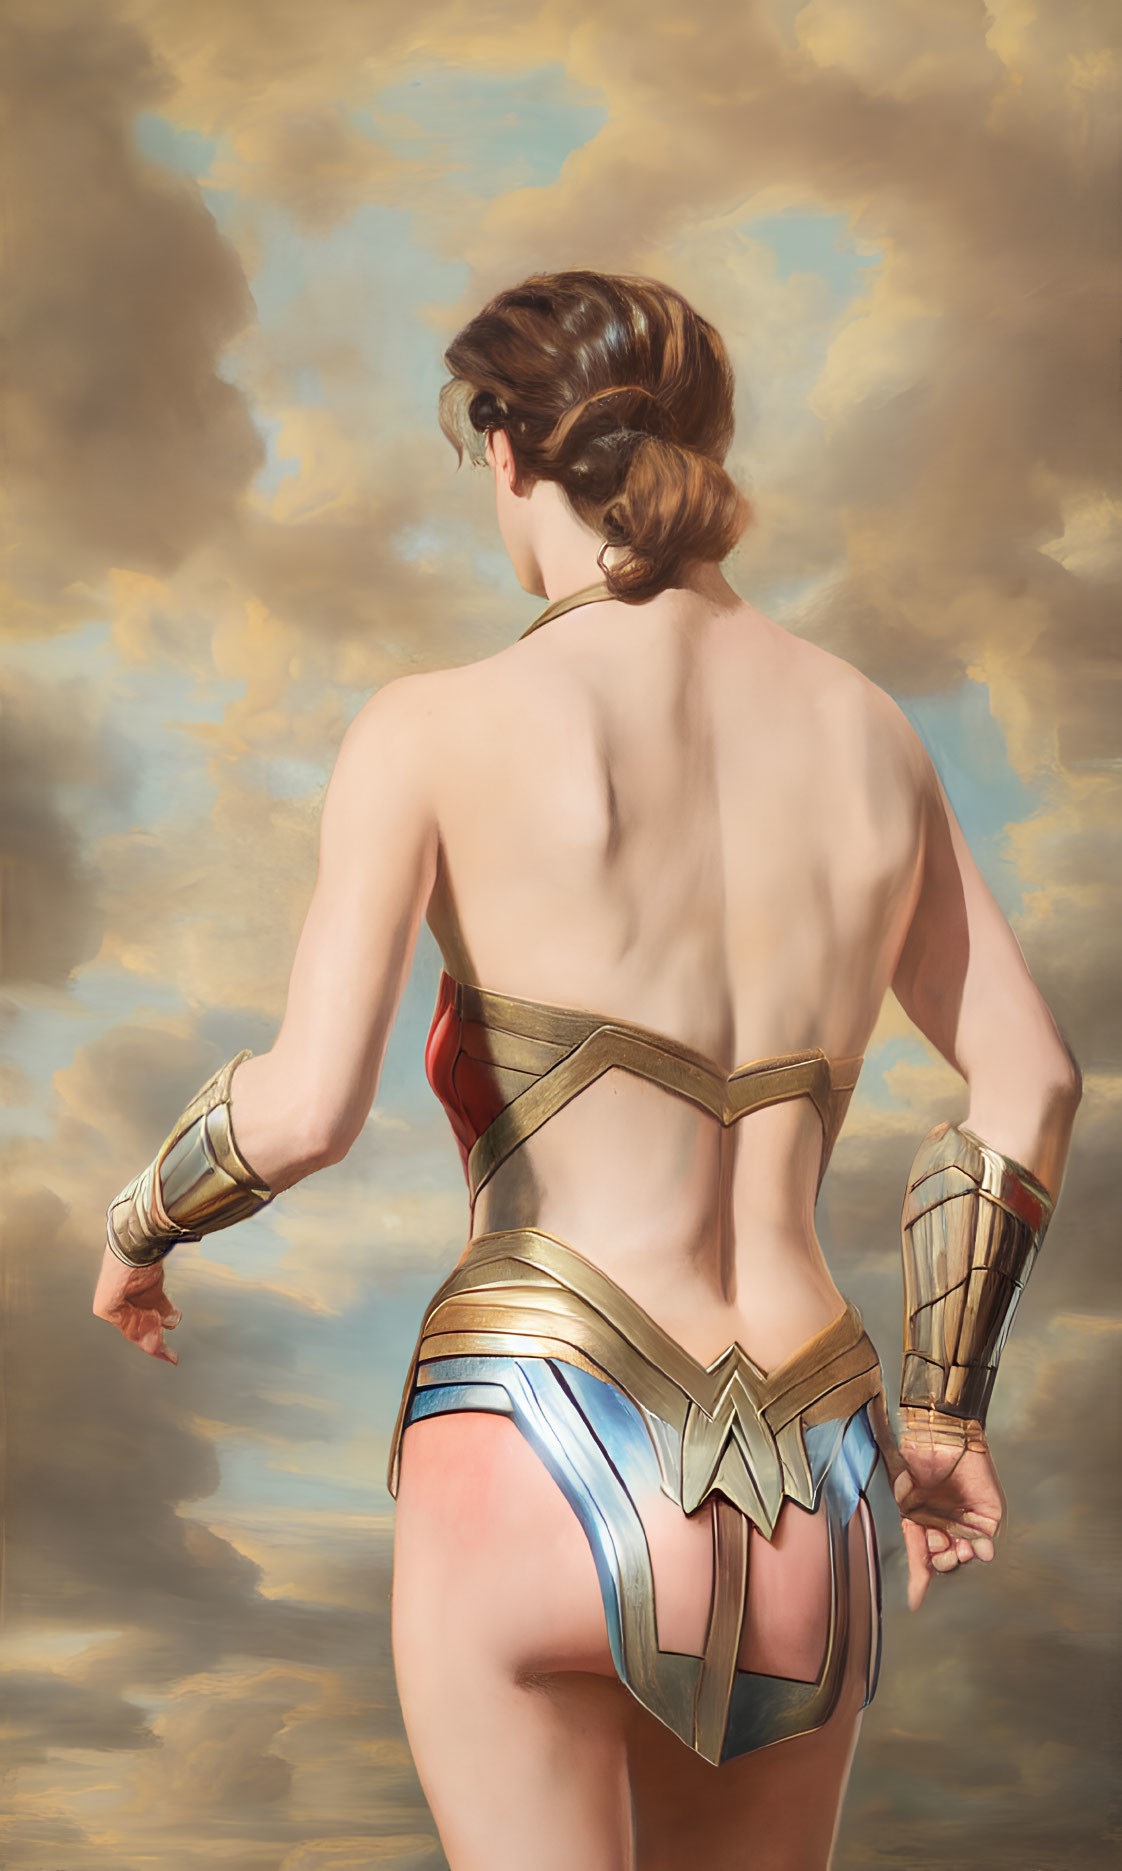 Woman in Wonder Woman costume displays muscular physique against cloudy sky.